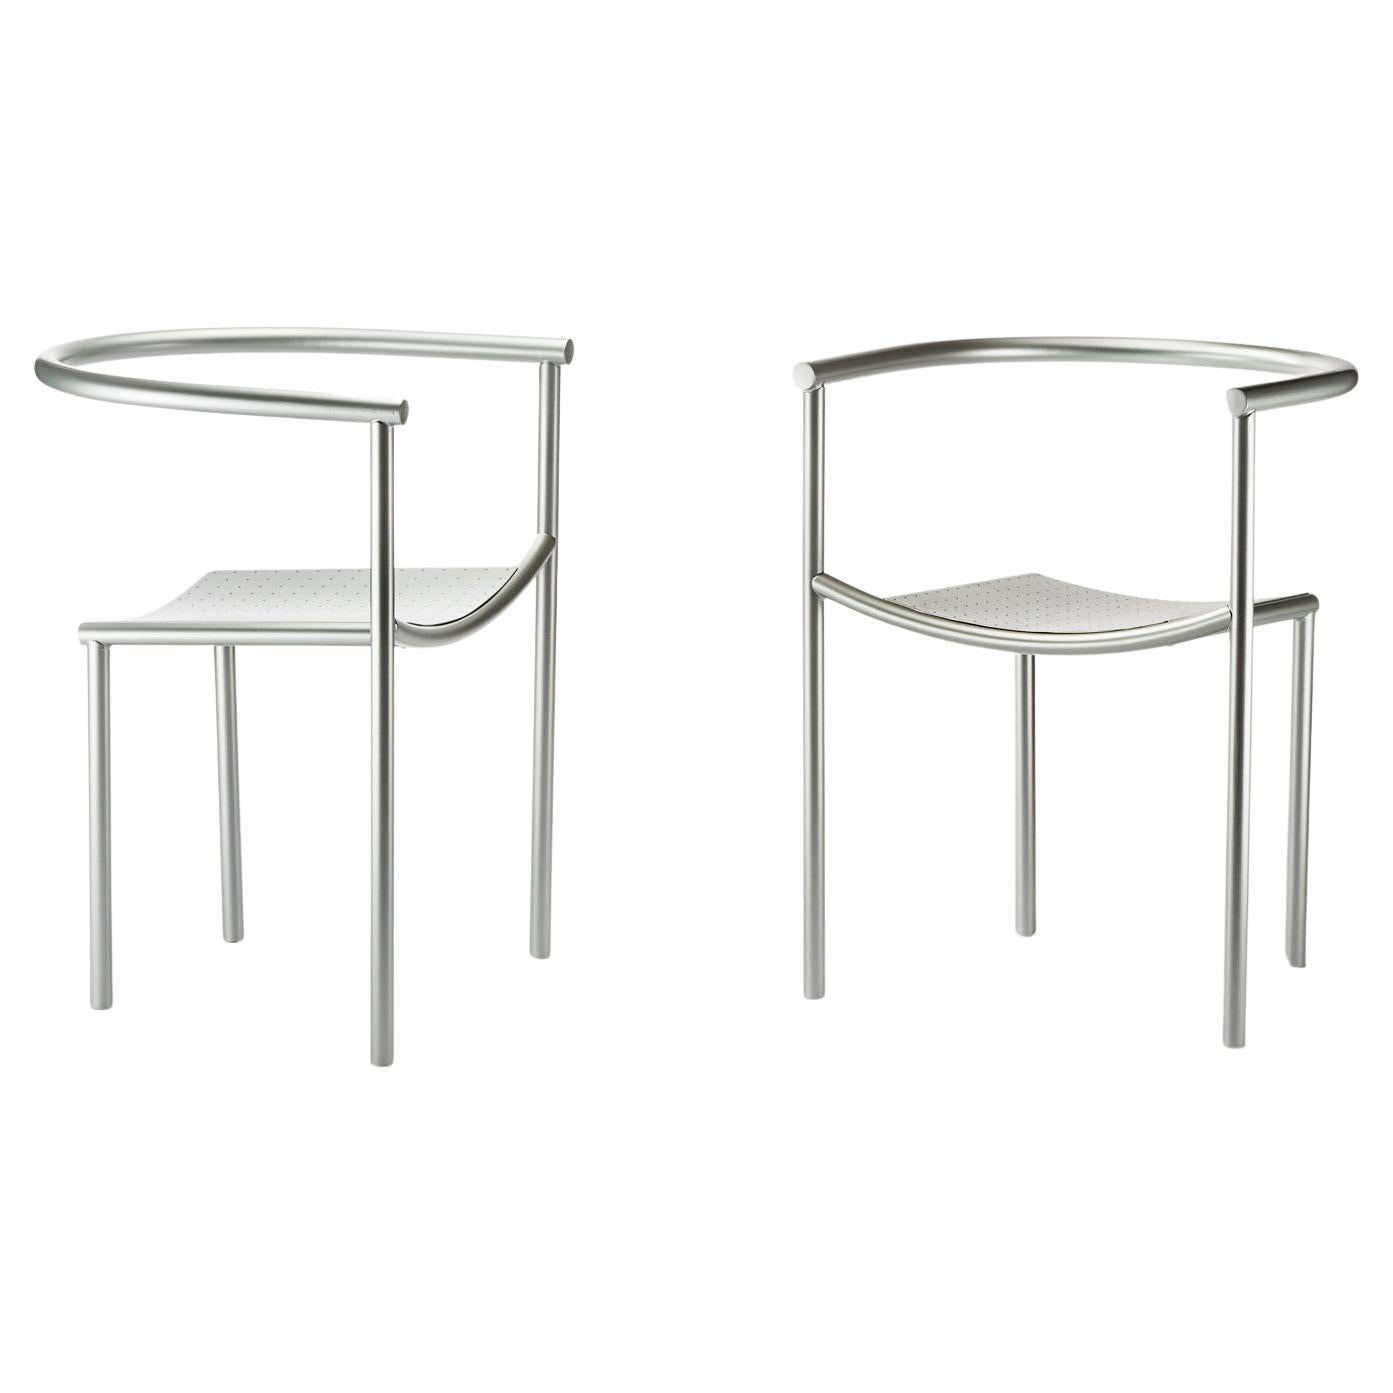 Pair of Von Vogelsang chairs by Phlippe Starck for Driade in 1985